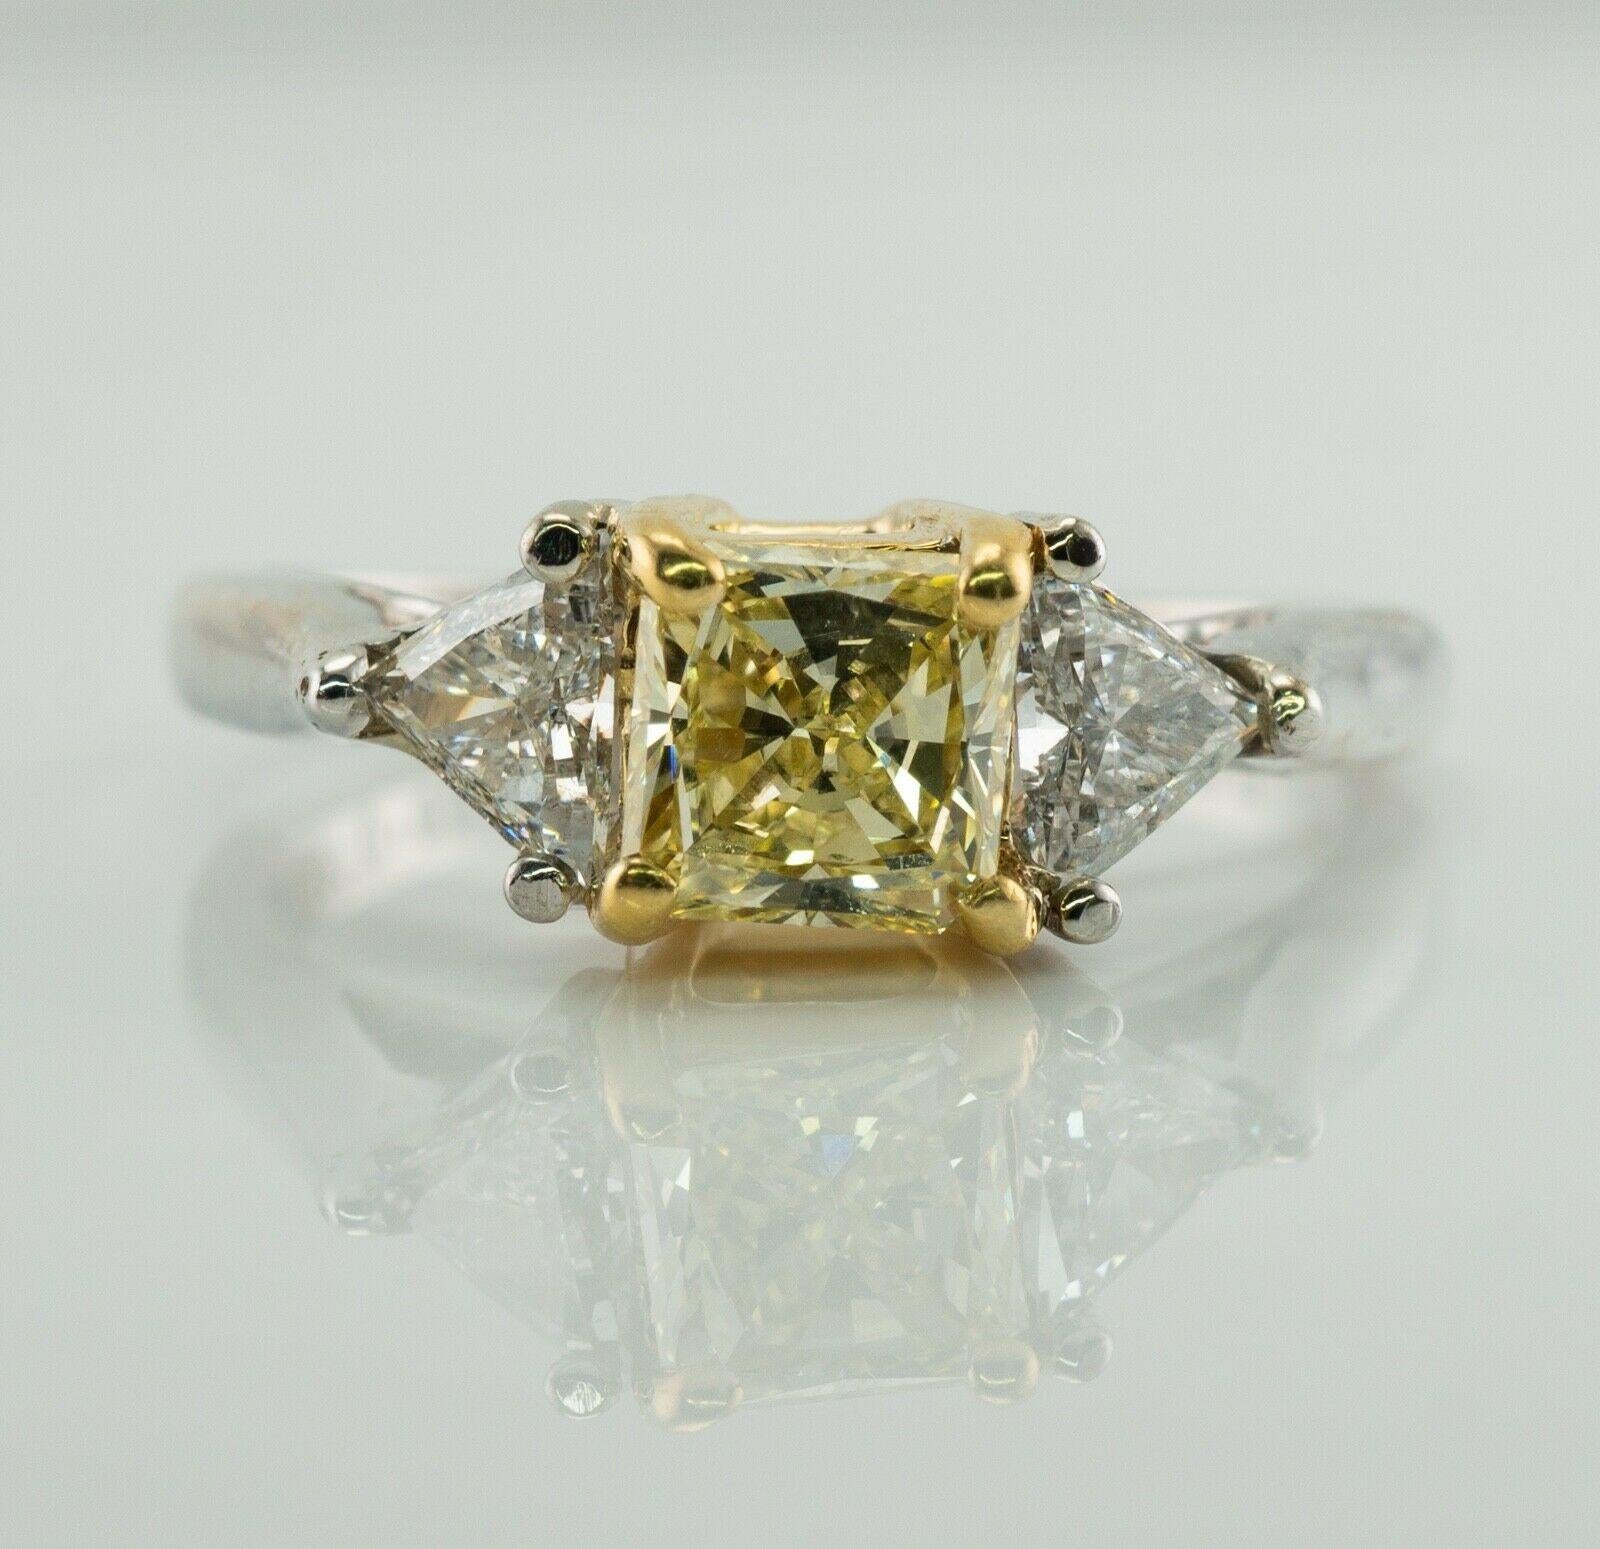 This beautiful estate engagement ring is crafted in solid 18K White Gold.
The center princess cut natural fancy yellow Diamond is .65 carat of VS1 clarity.
Two side trillion cut diamonds are .27 and .33 carat of SI2 clarity and H color.
The top